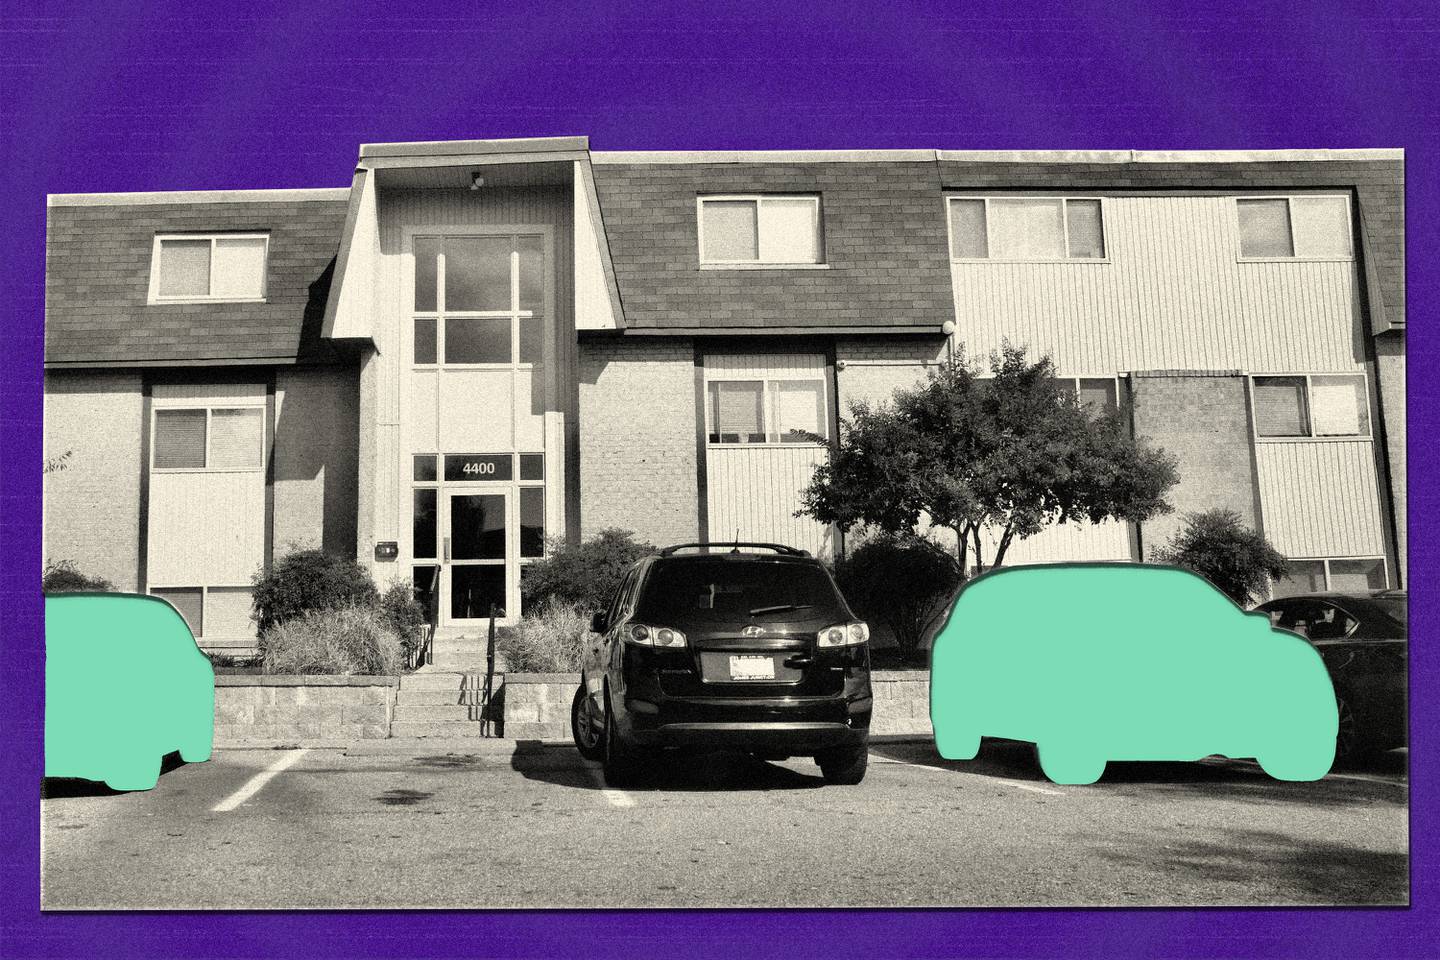 Photo illustration of apartment complex with cars parked in front against a dark purple background; two cars are removed from the image, showing teal color in the cut out areas.